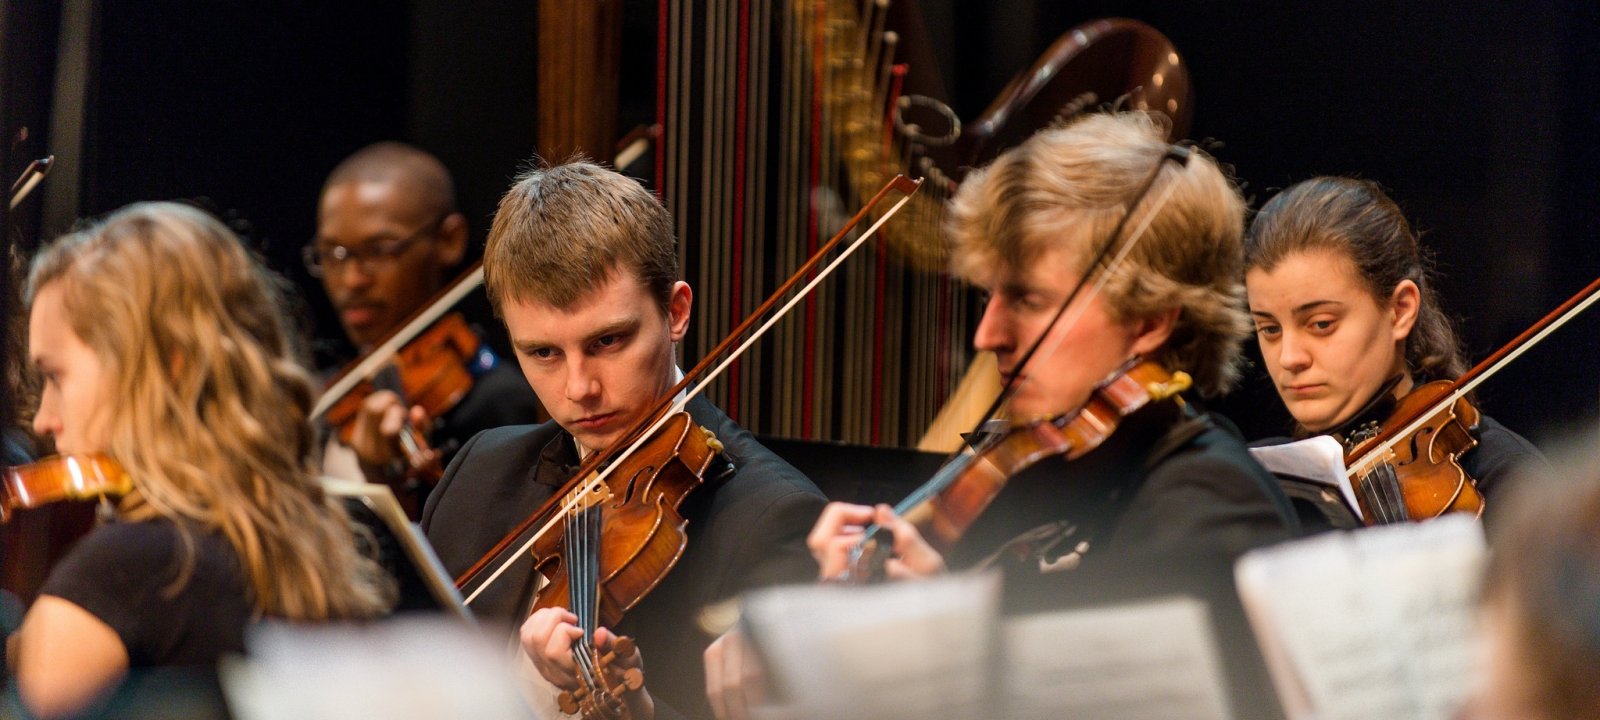 Students performing in the Keweenaw Symphony Orchestra, a closer view of the violinists.